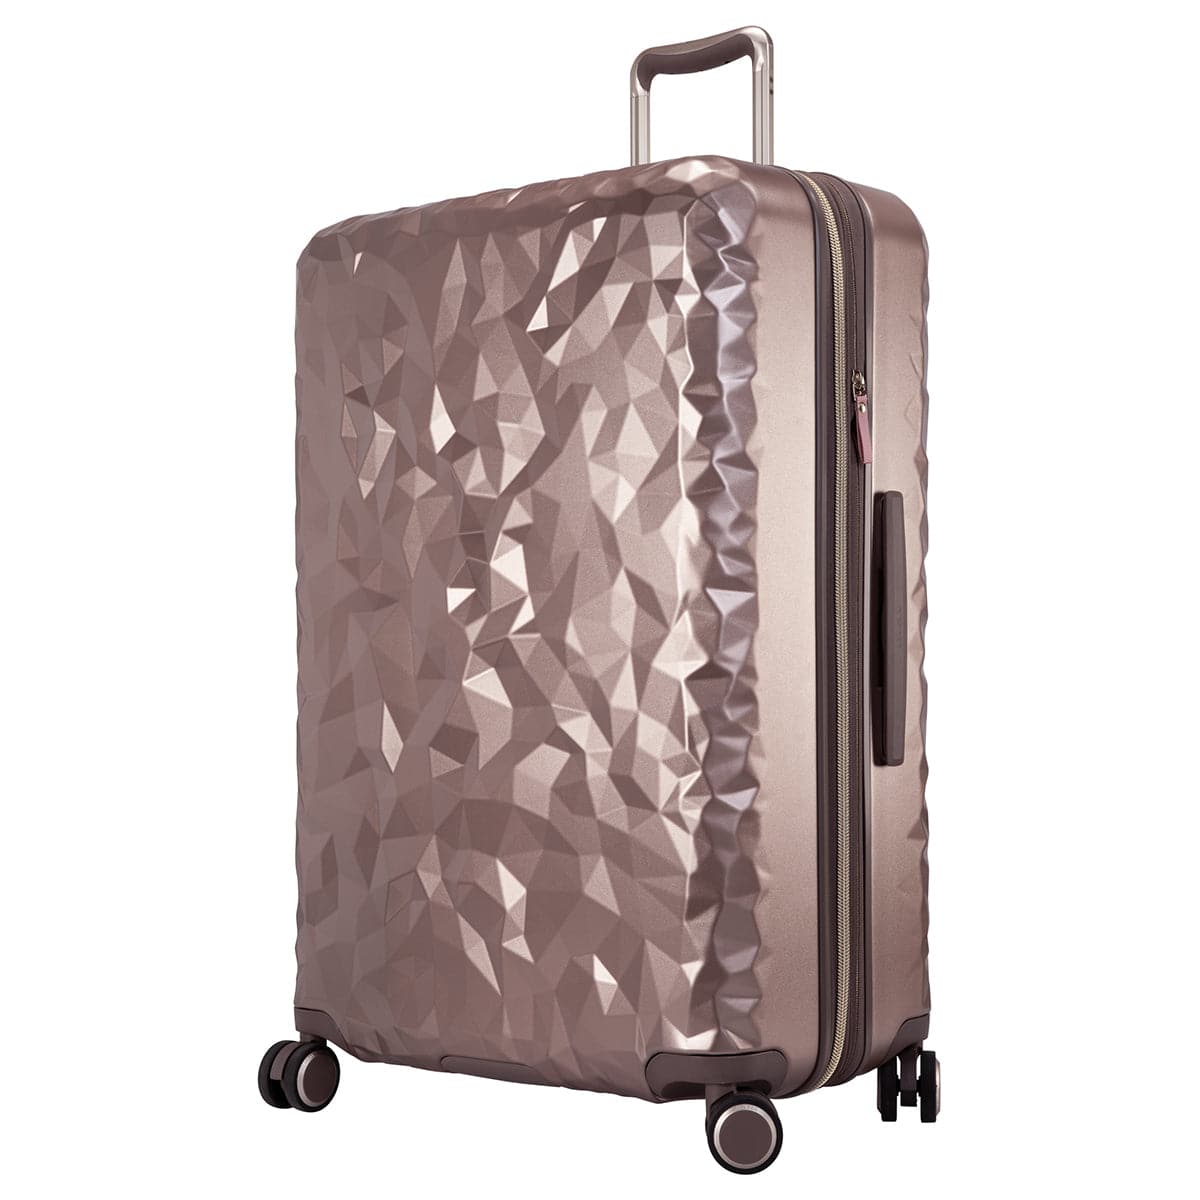 Ricardo Beverly Hills Indio Large Check-In Suitcase Luggage